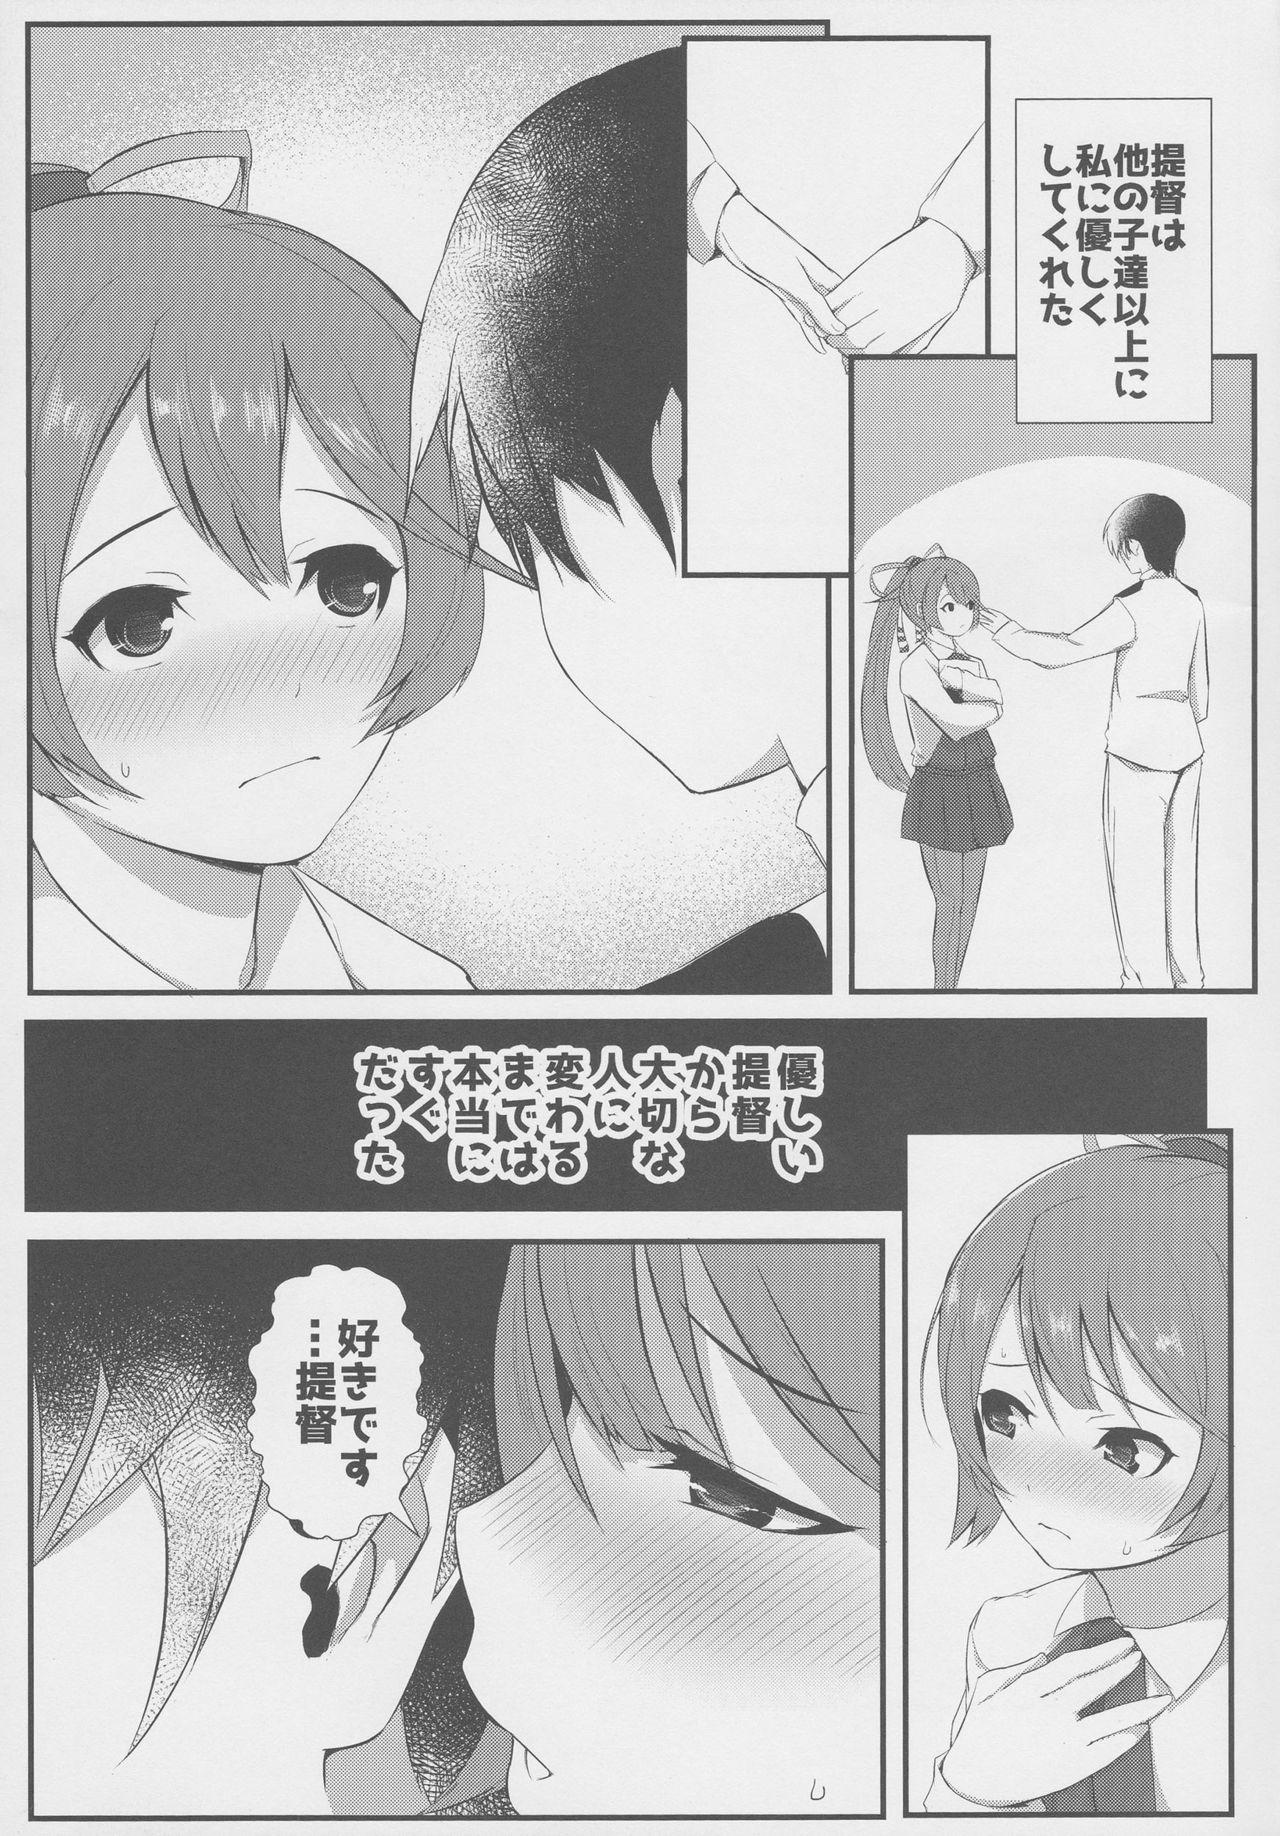 Brunet Look at ME - Kantai collection Swedish - Page 7